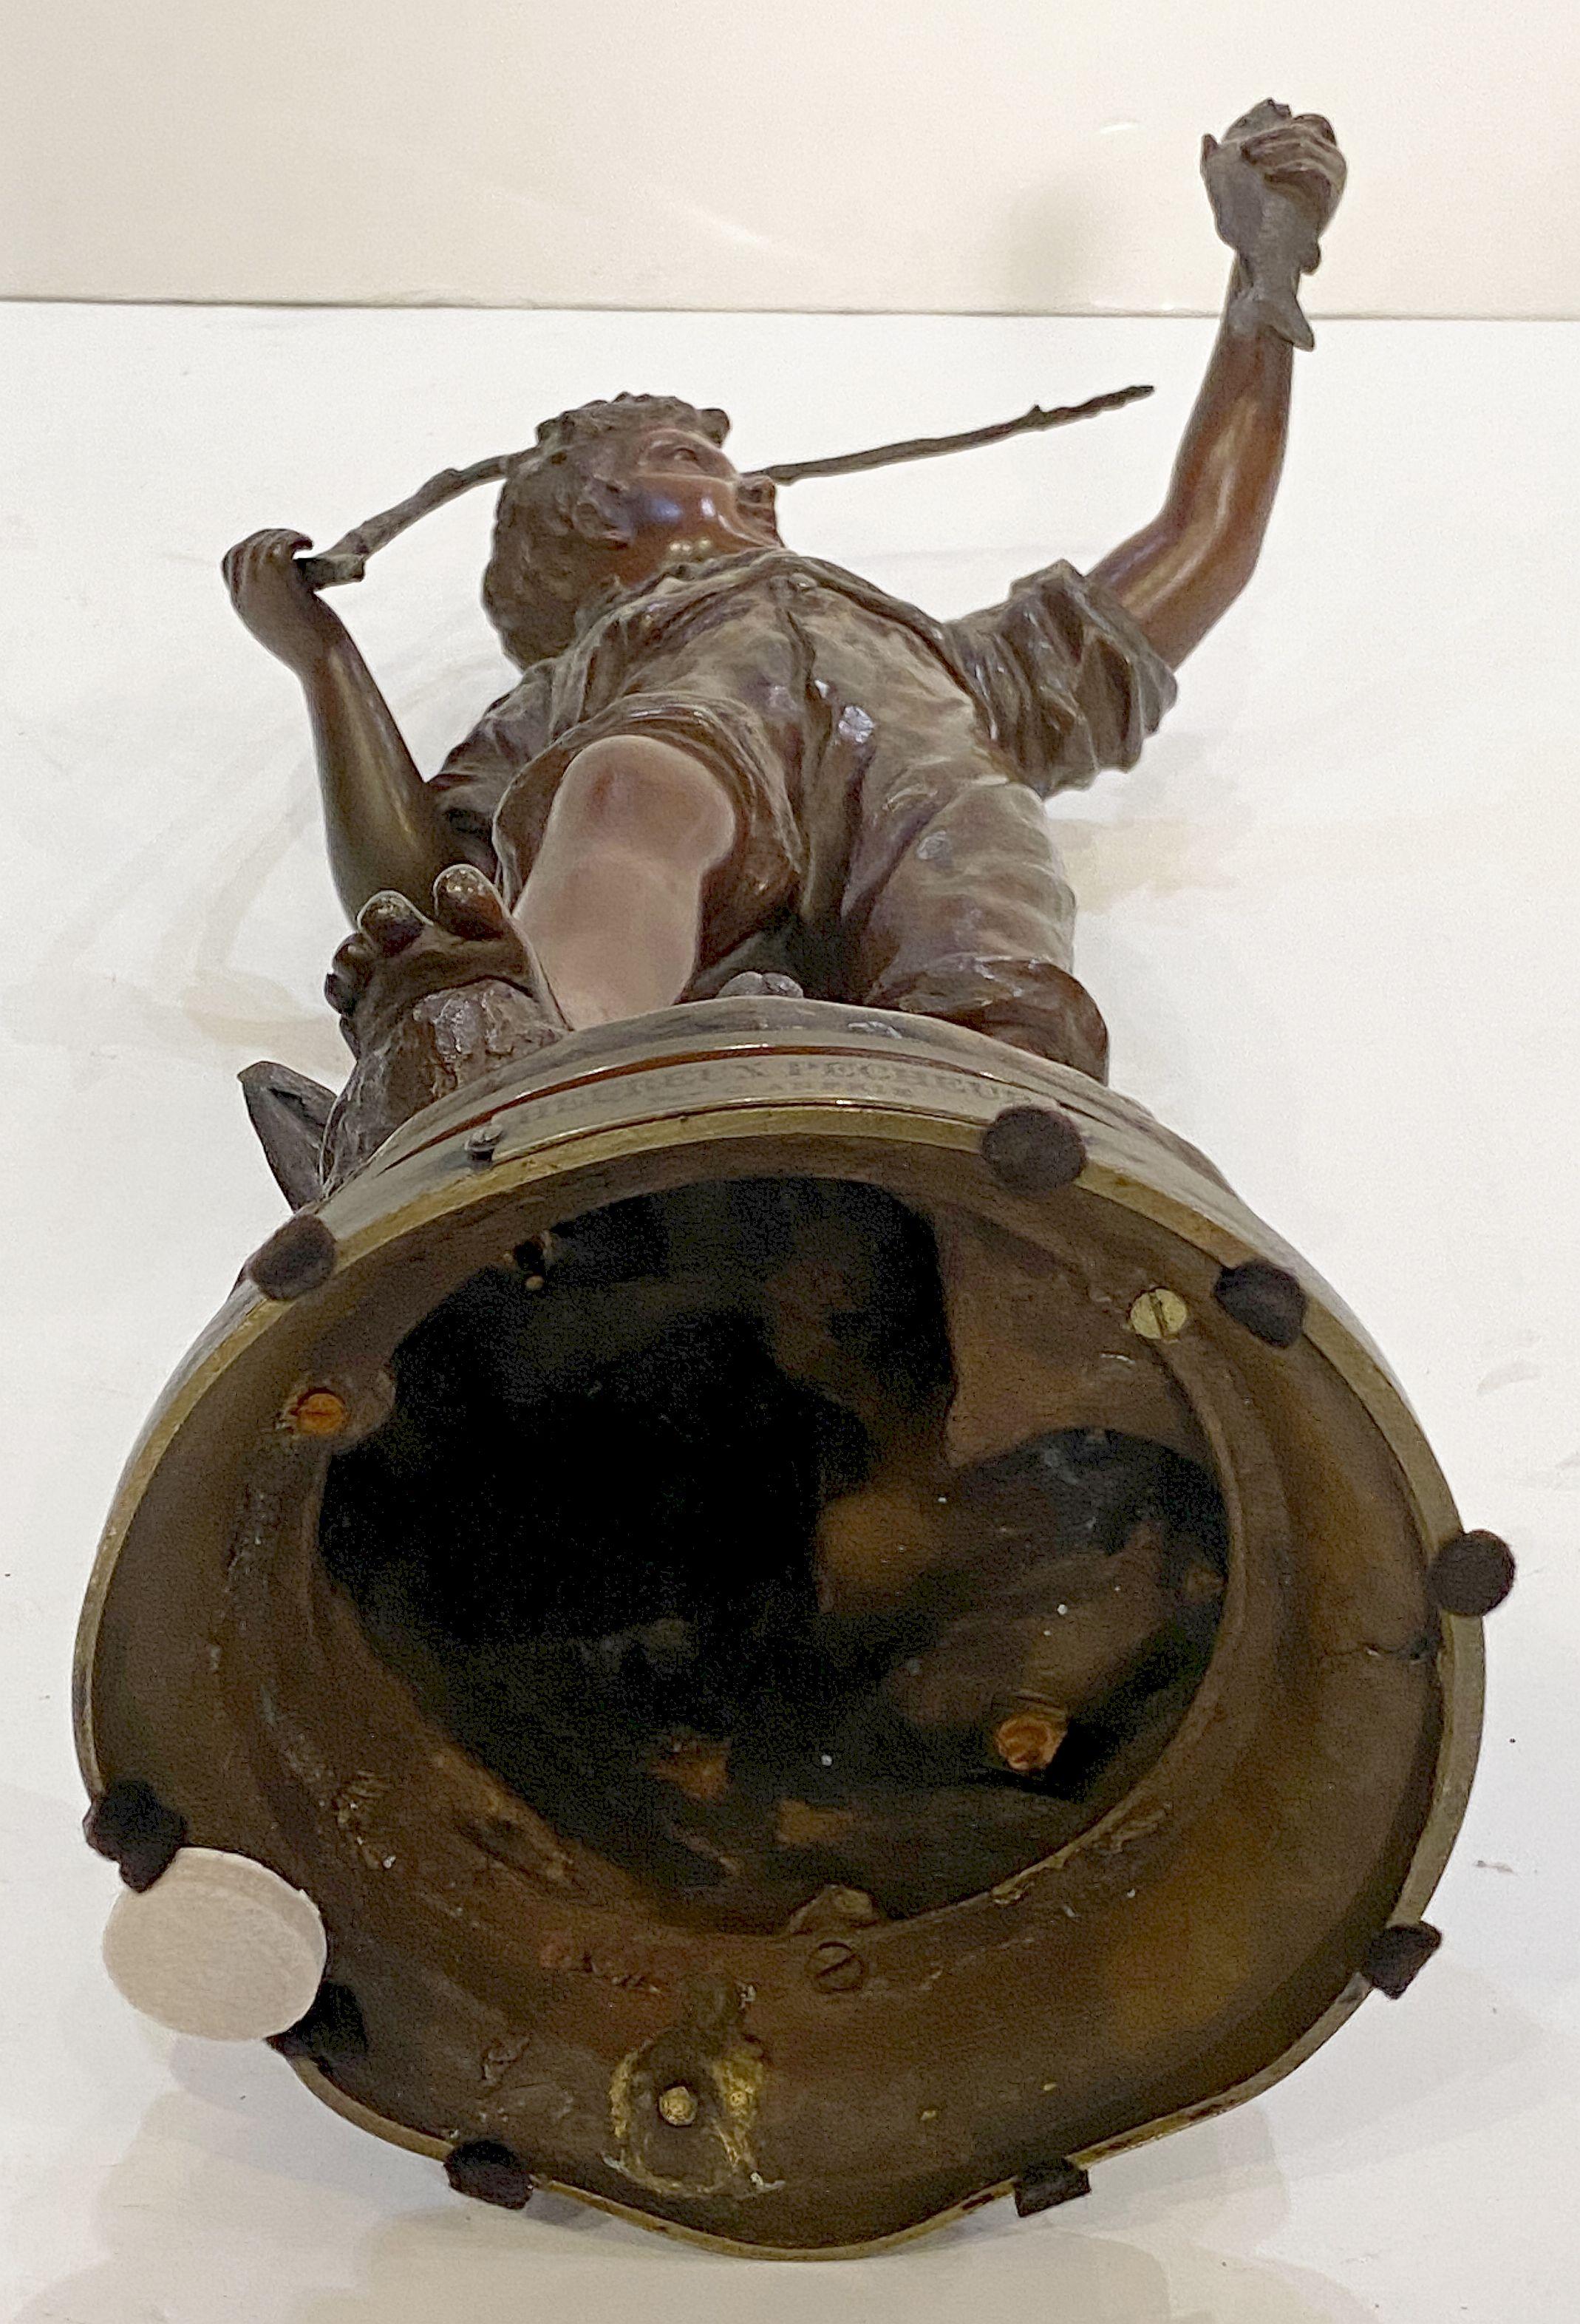 Heureux Pêcheur or Happy Fisherboy Bronze Sculptural Figure by Charles Anfrie  13